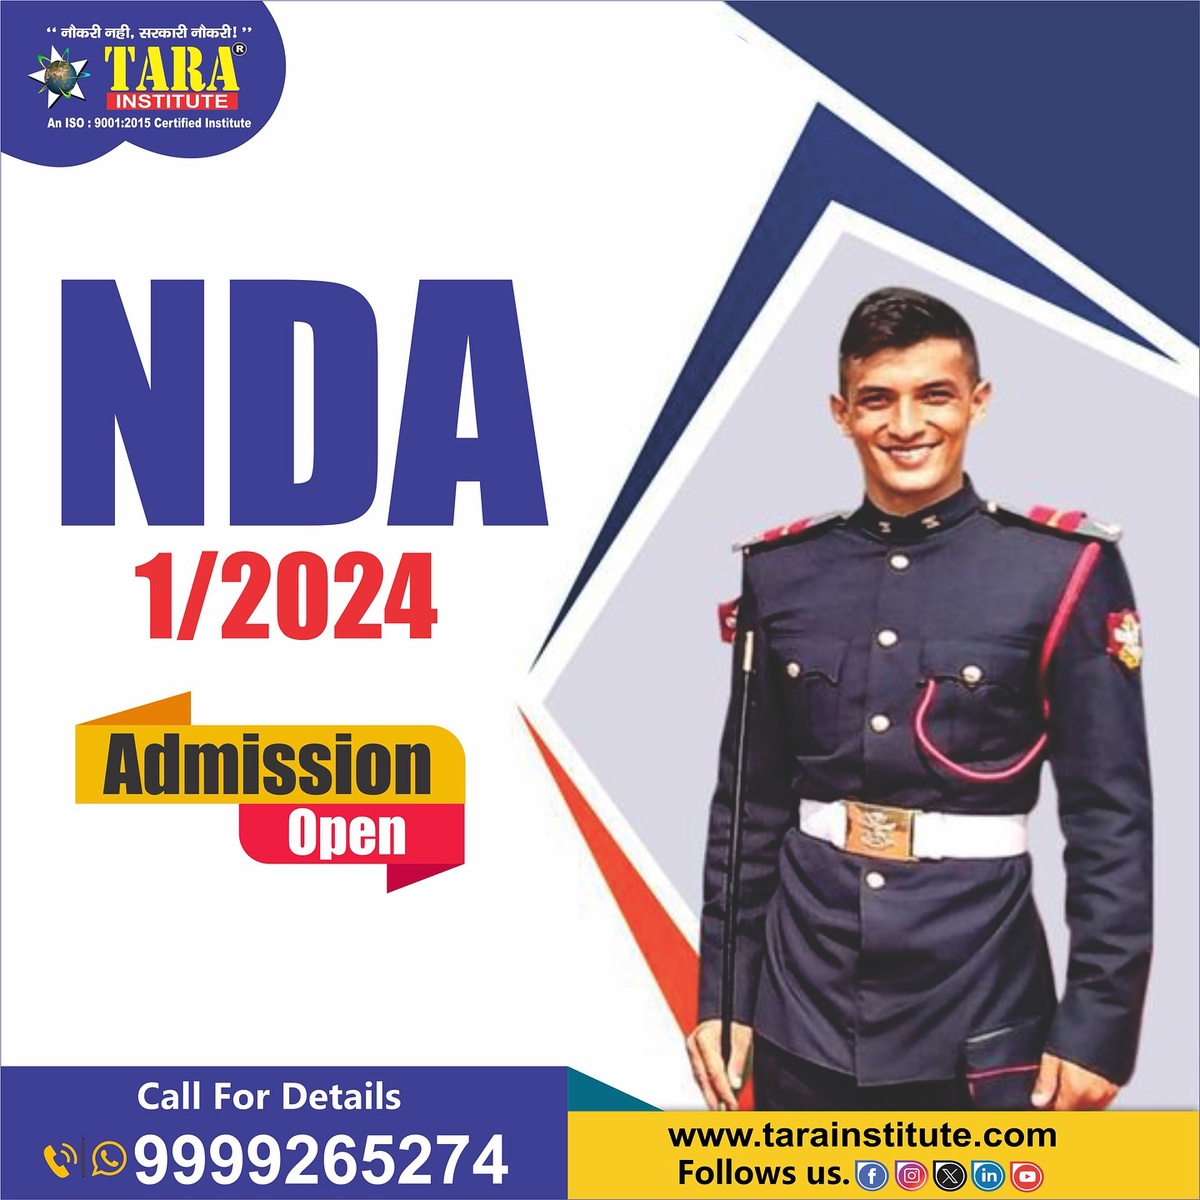 Top-rated NDA Exam Coaching in Delhi — Prepare with Confidence